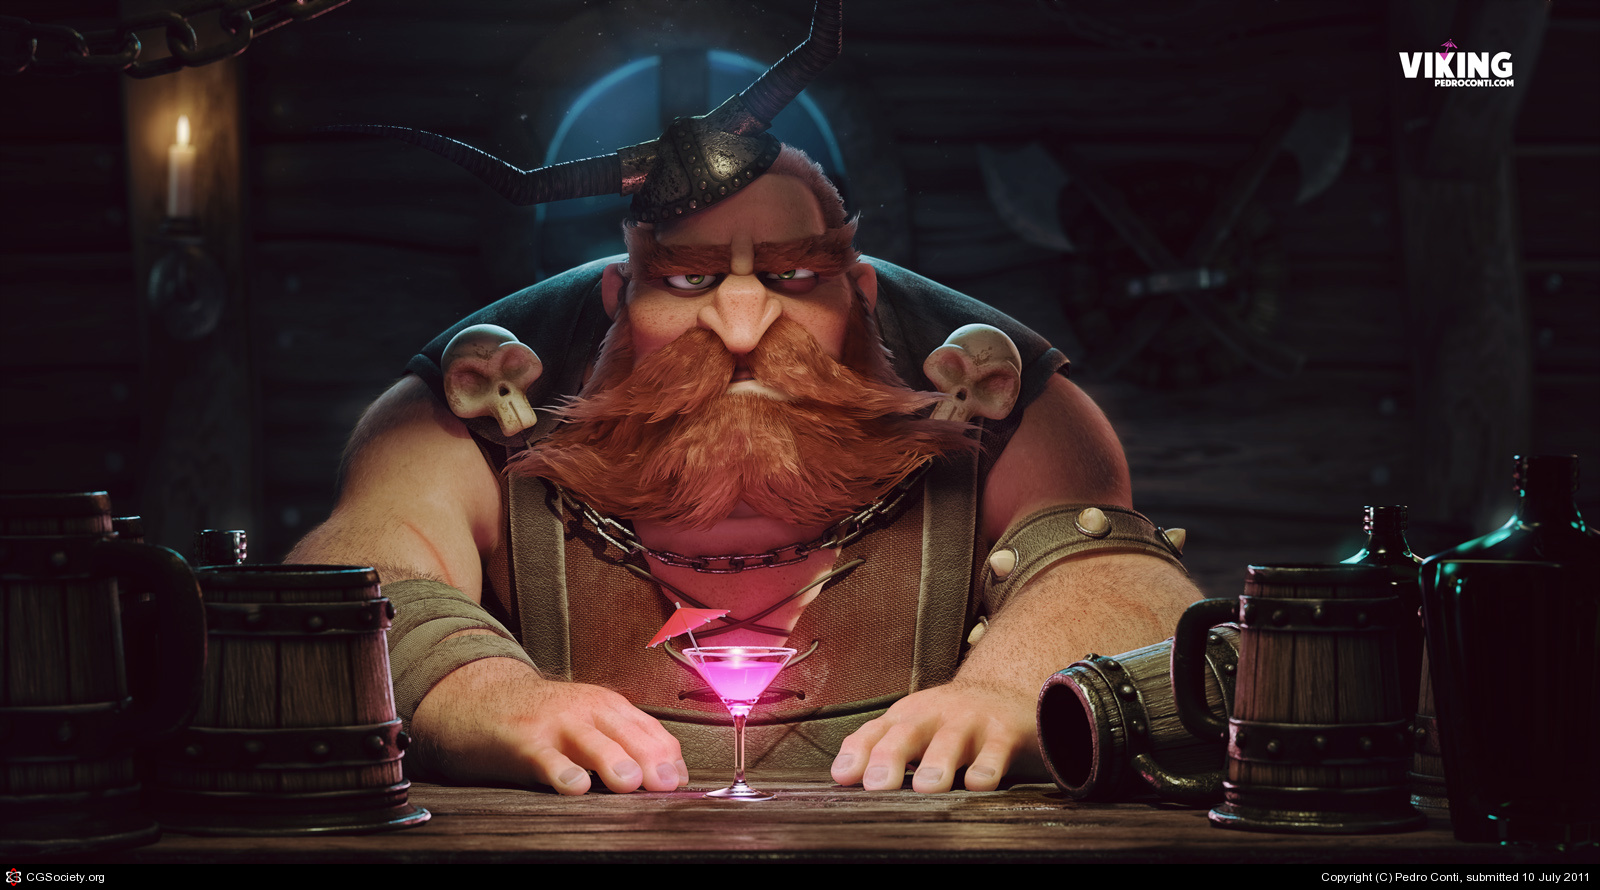 d dmax zbrush vray mental ray photoshop after effects viking Pedro Conti